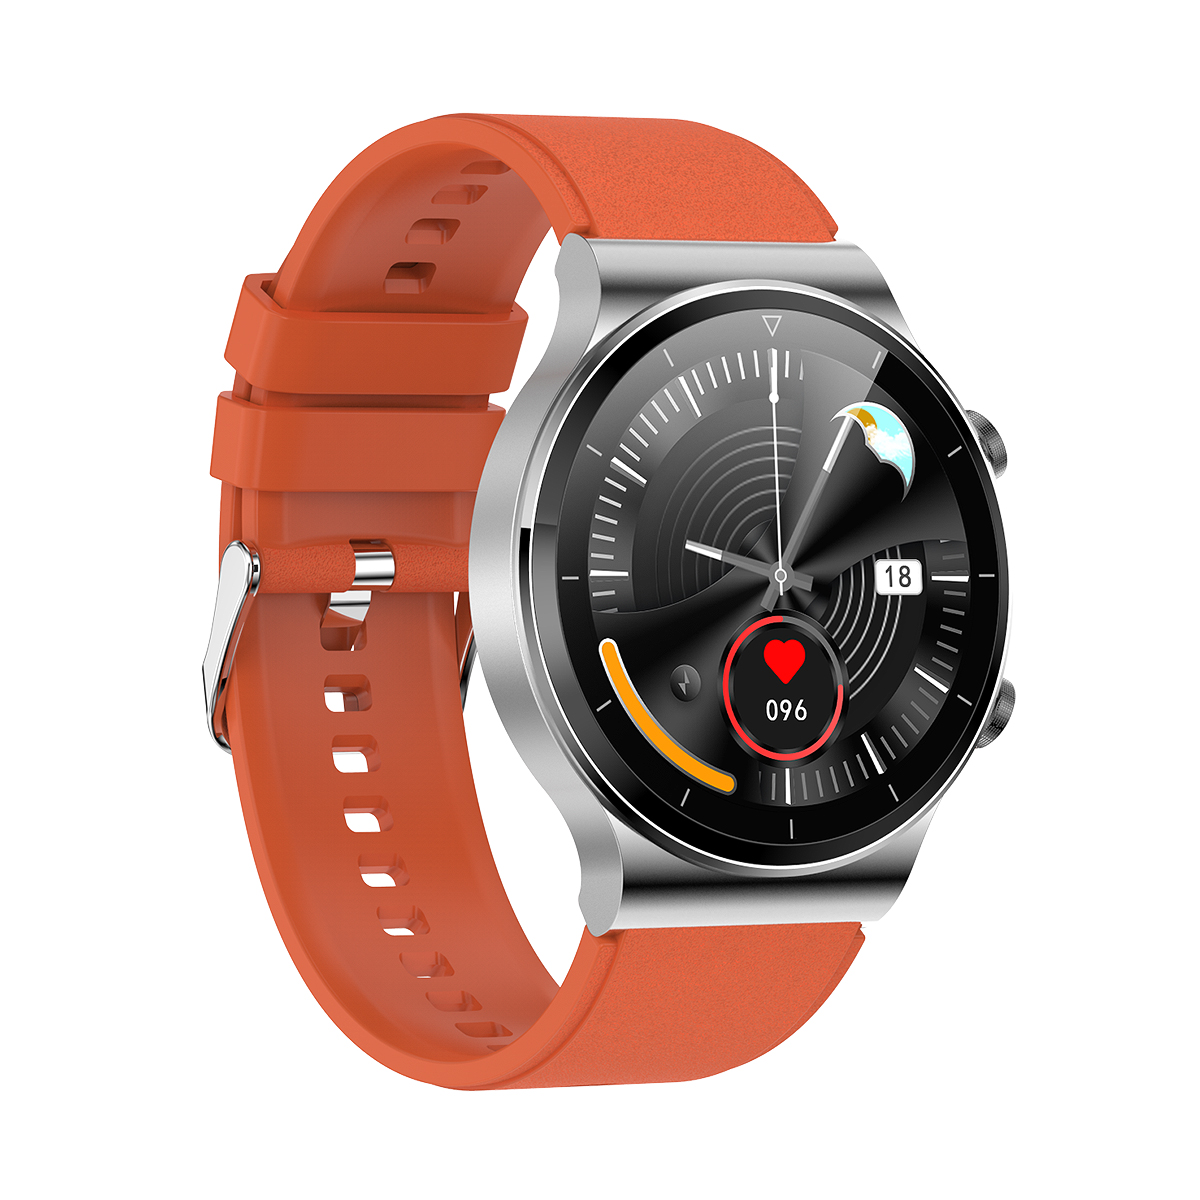 1.28 Inch Full Touch Screen 4GB Memory Bt Call Heart Rate Monitor Sport Smart Watch G51